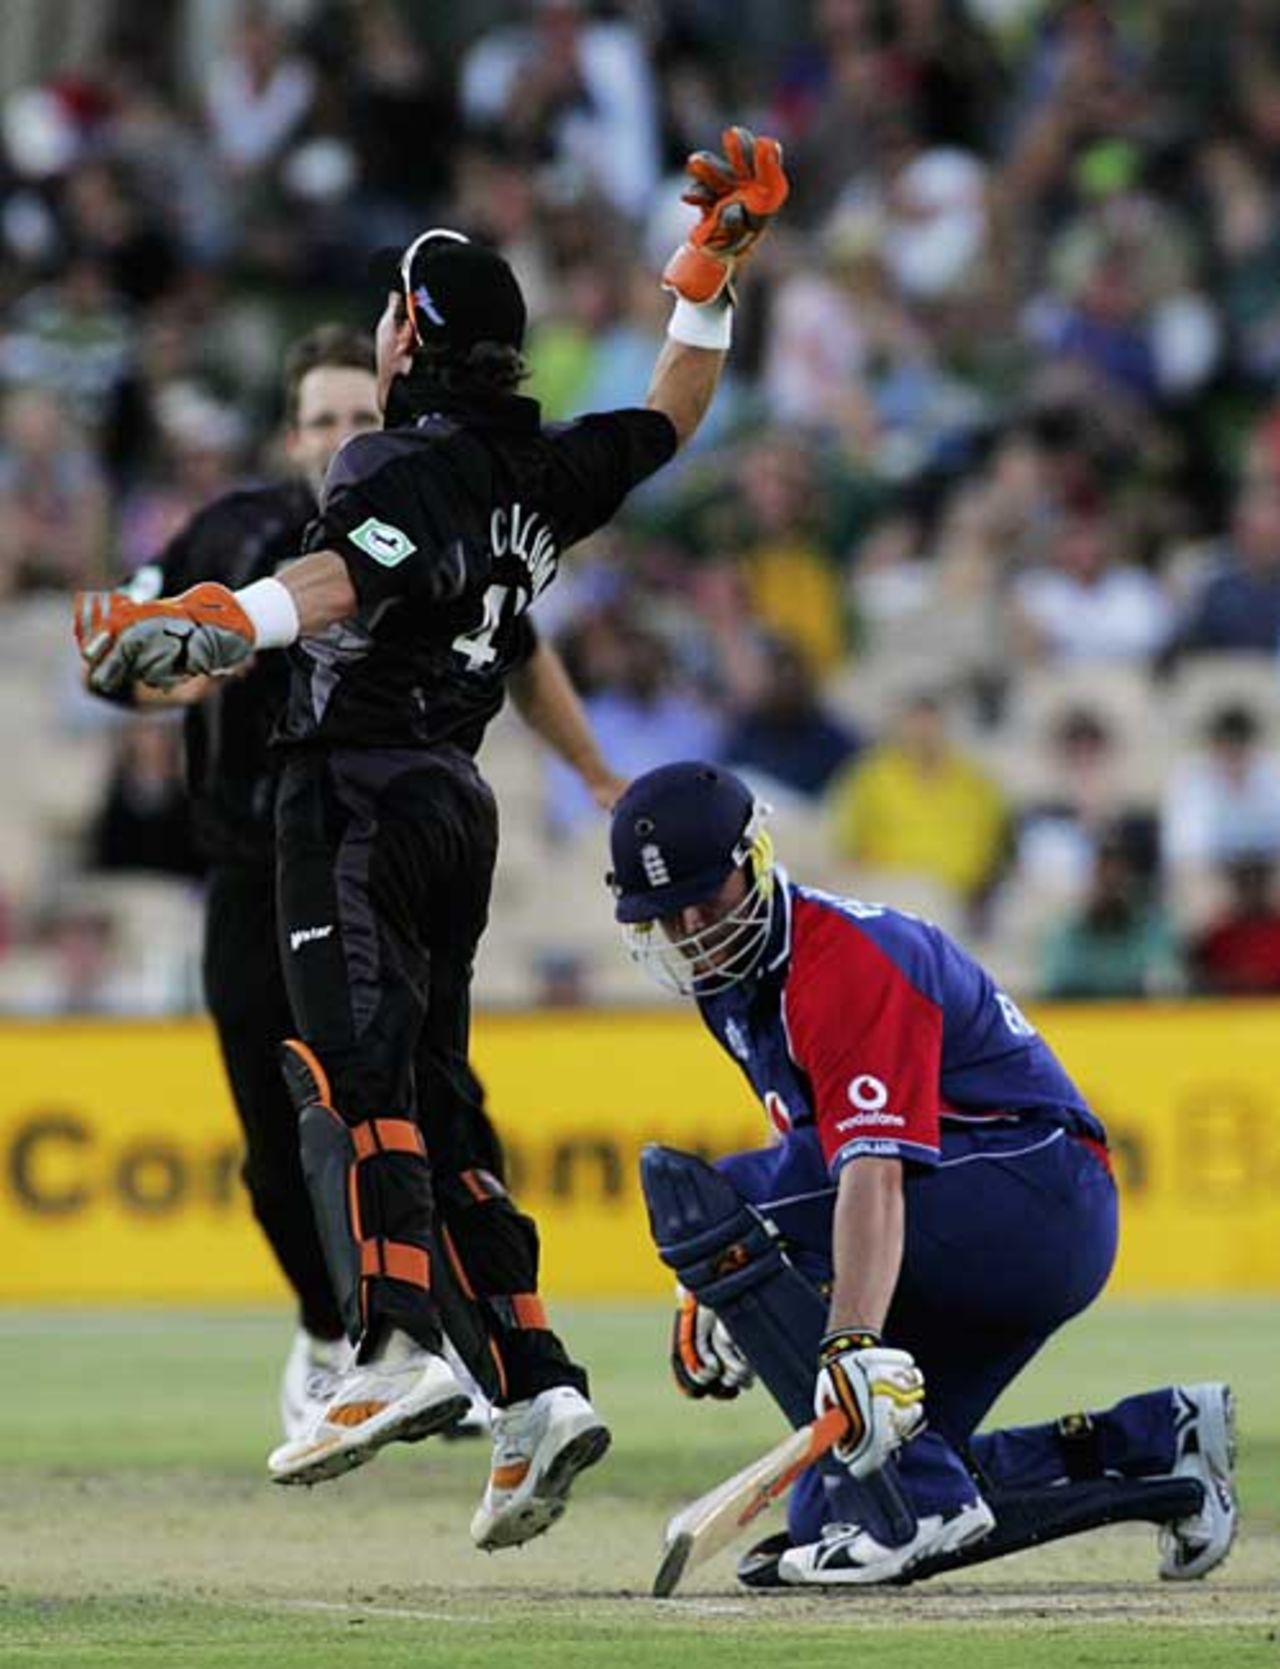 Brendon McCullum catches Andrew Flintoff as England fold, England v New Zealand, CB Series, Adelaide, January 23, 2007